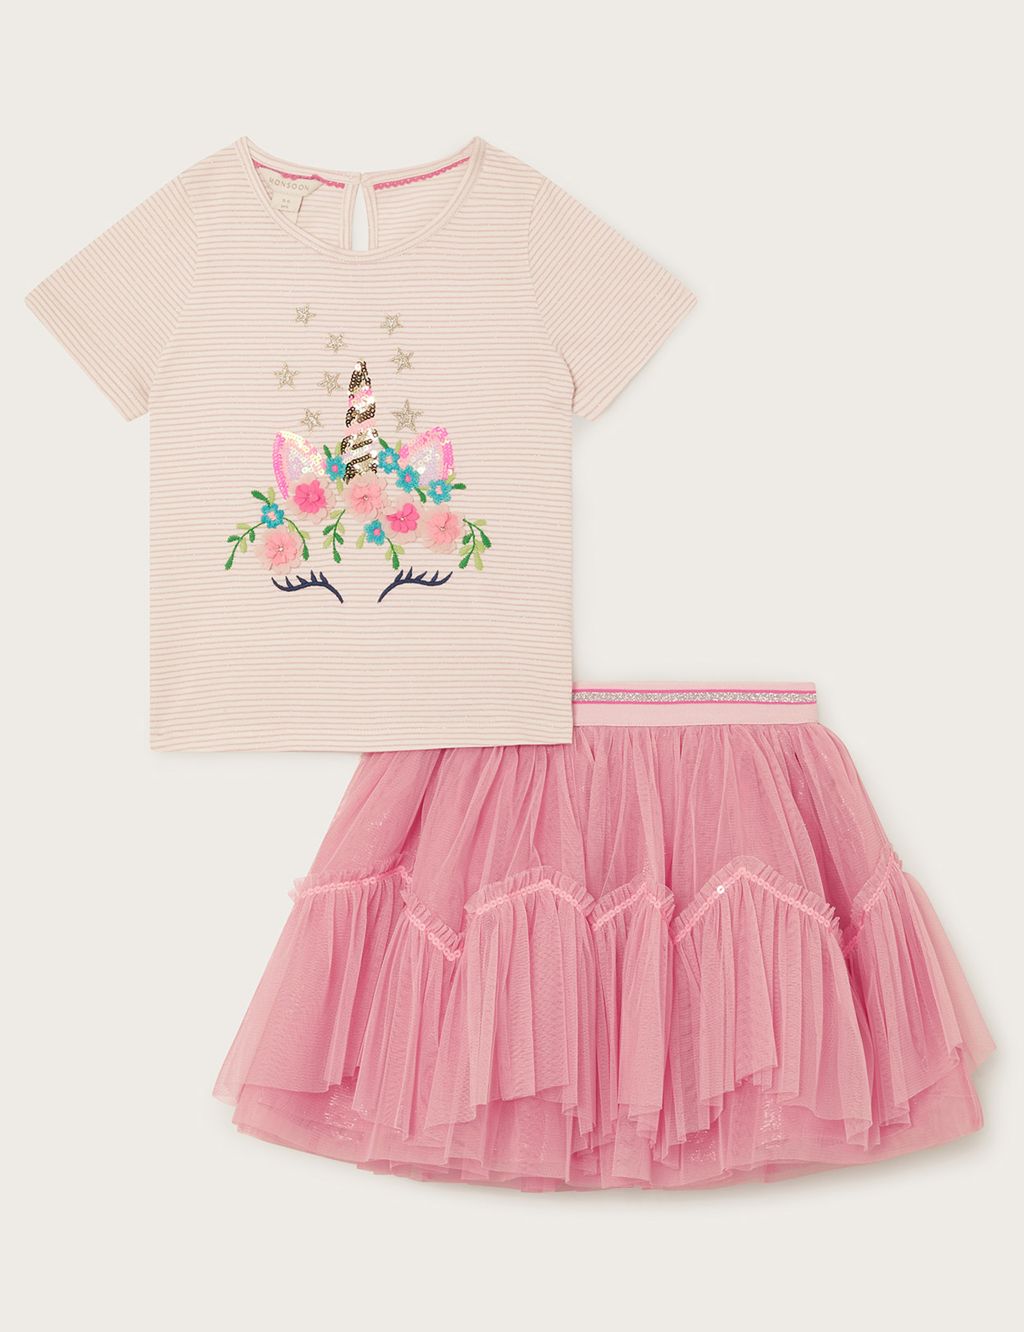 2pc Unicorn Top & Bottom Outfit (3-13 Yrs)